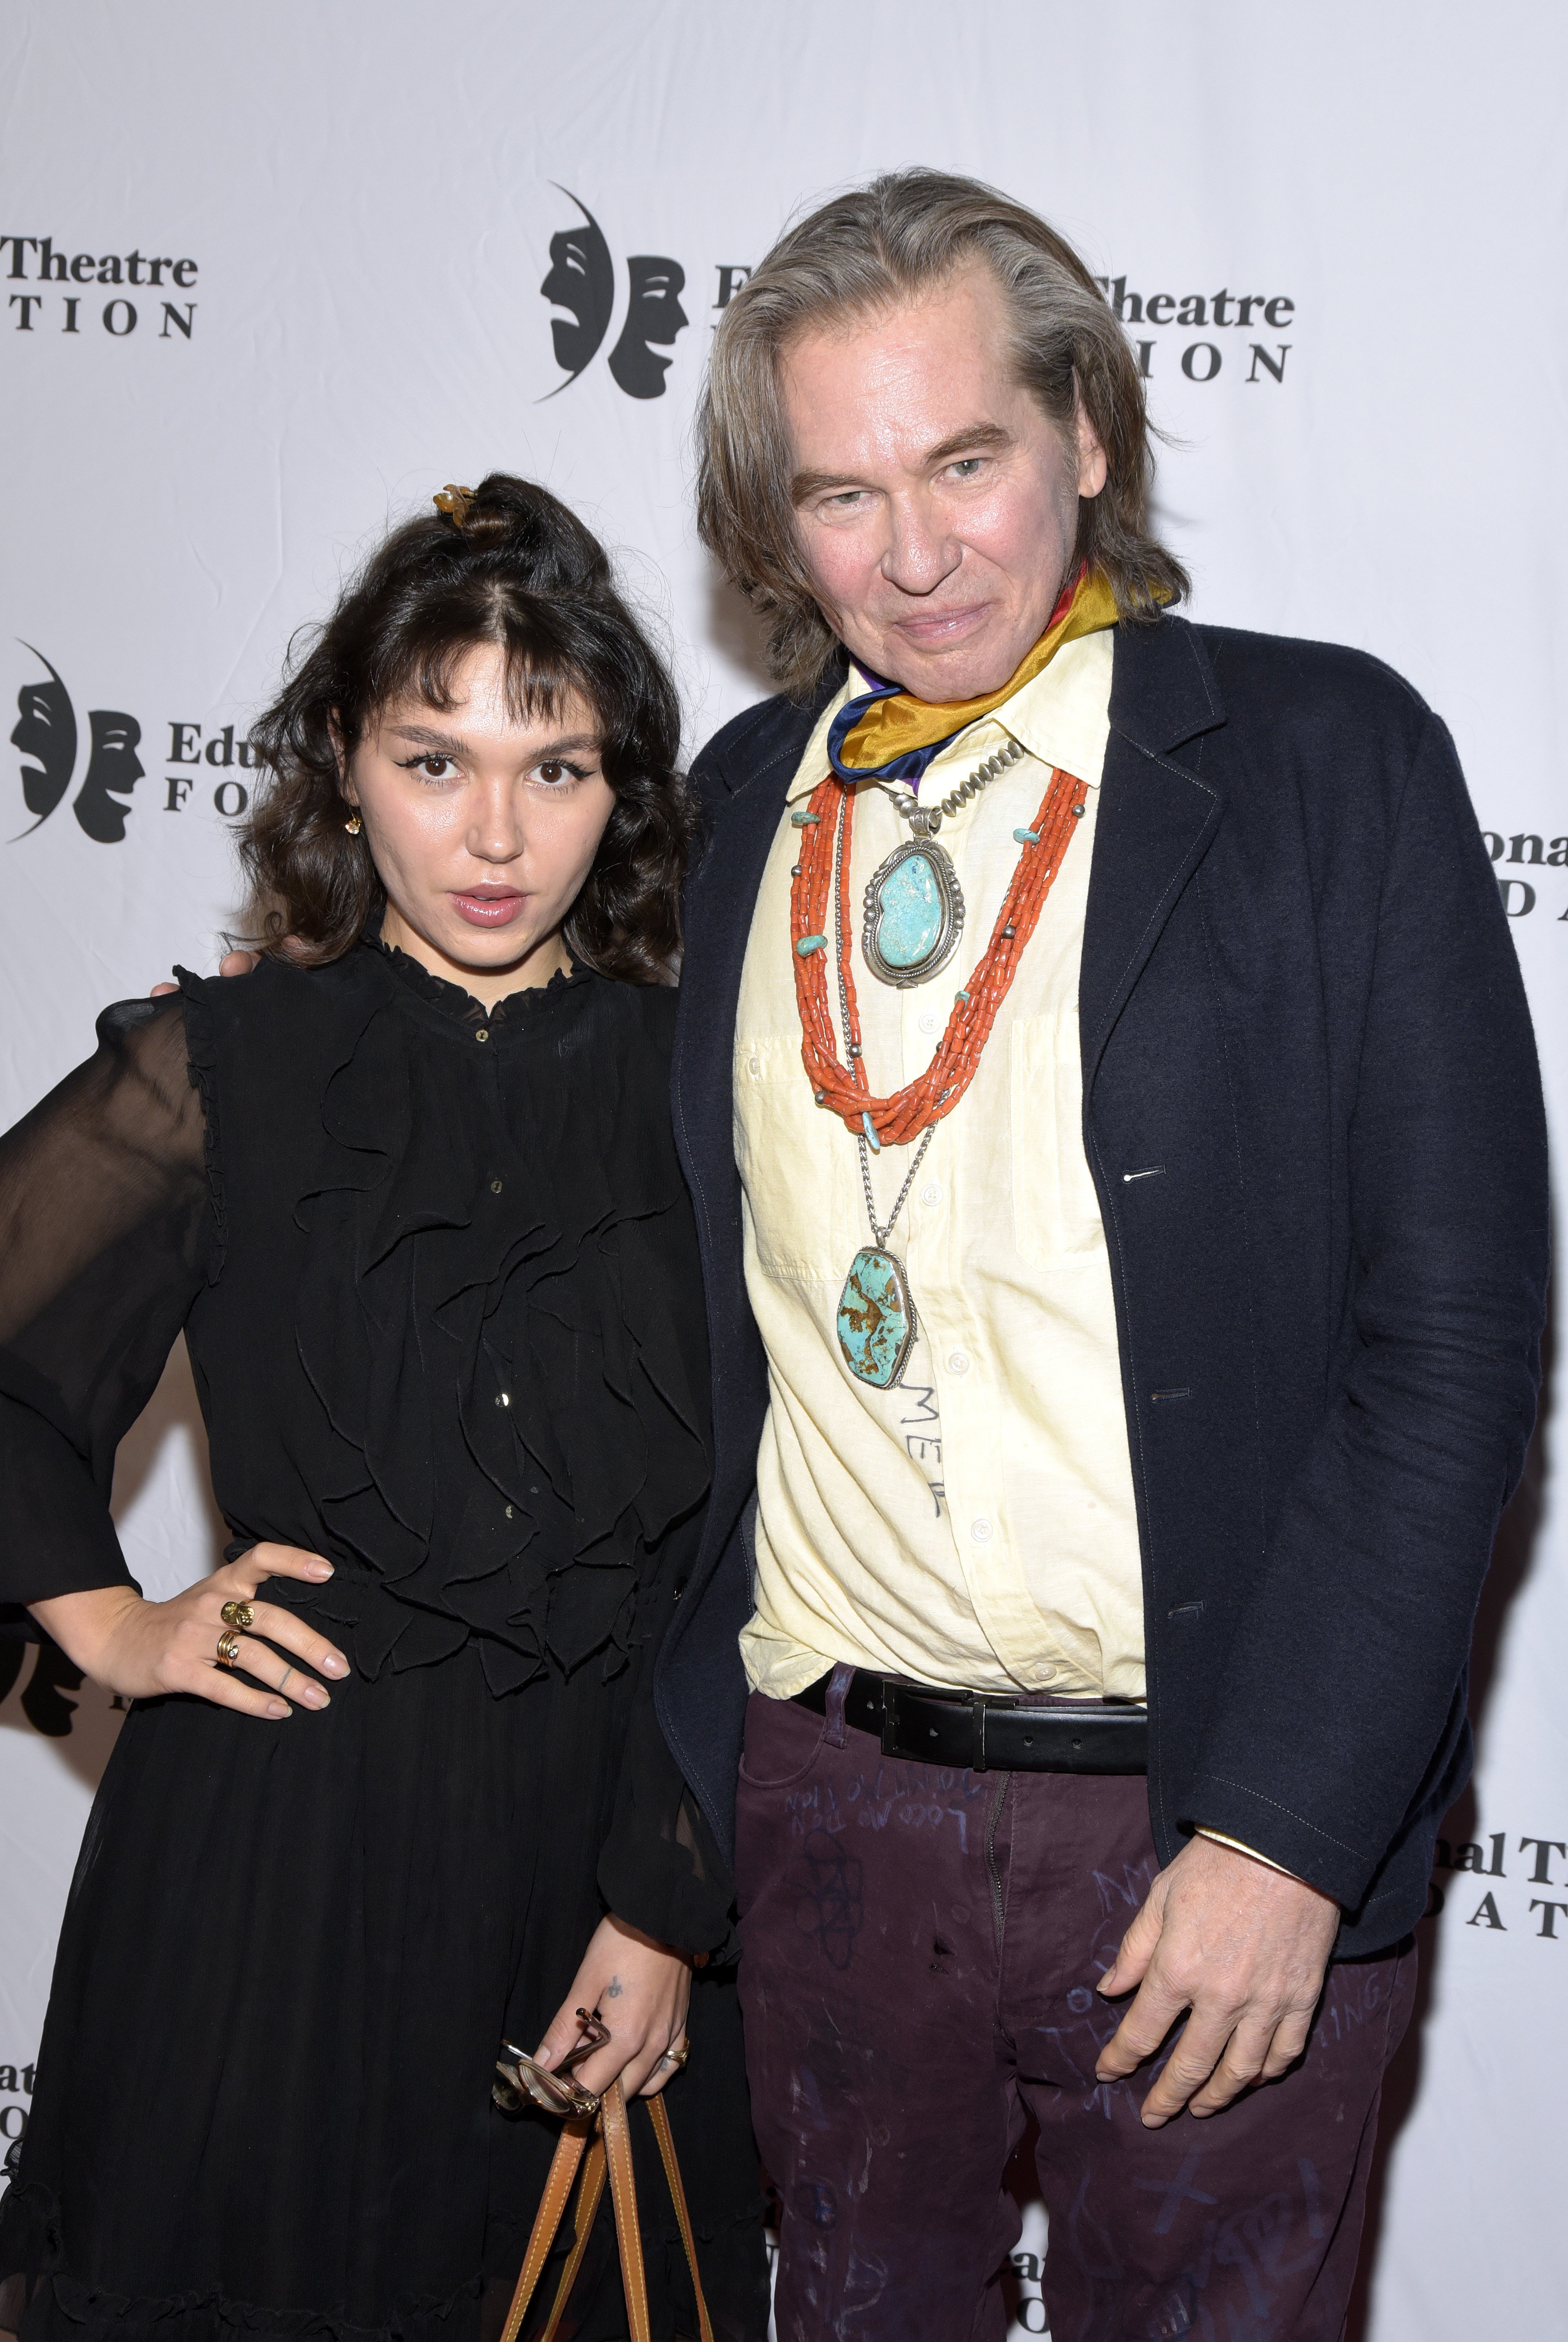 The "Paydirt" is the first film of Val Kilmer and Mercedes Kilmer this year. | Getty Images